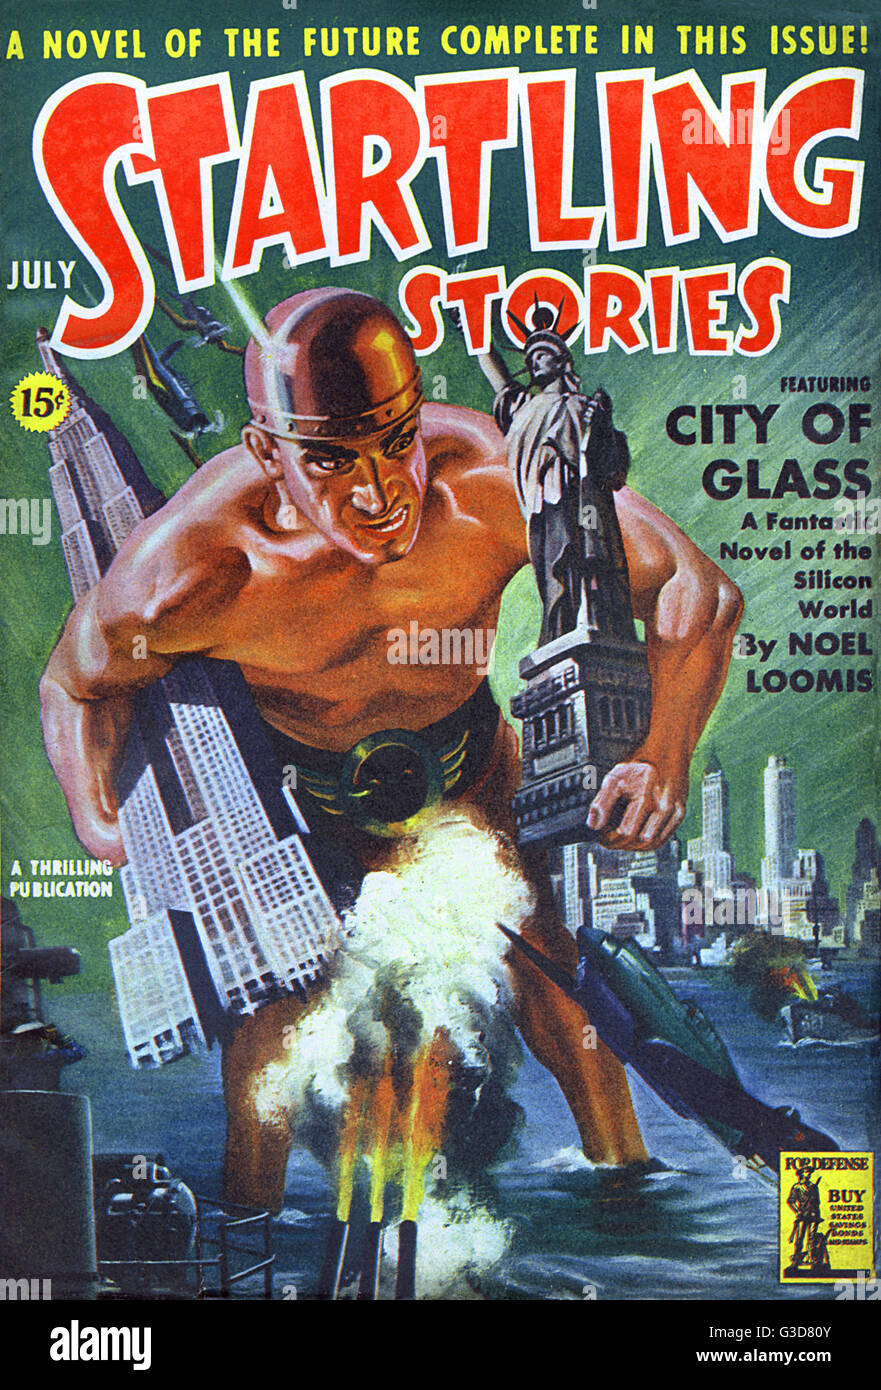 Startling Stories - City of Glass Stock Photo